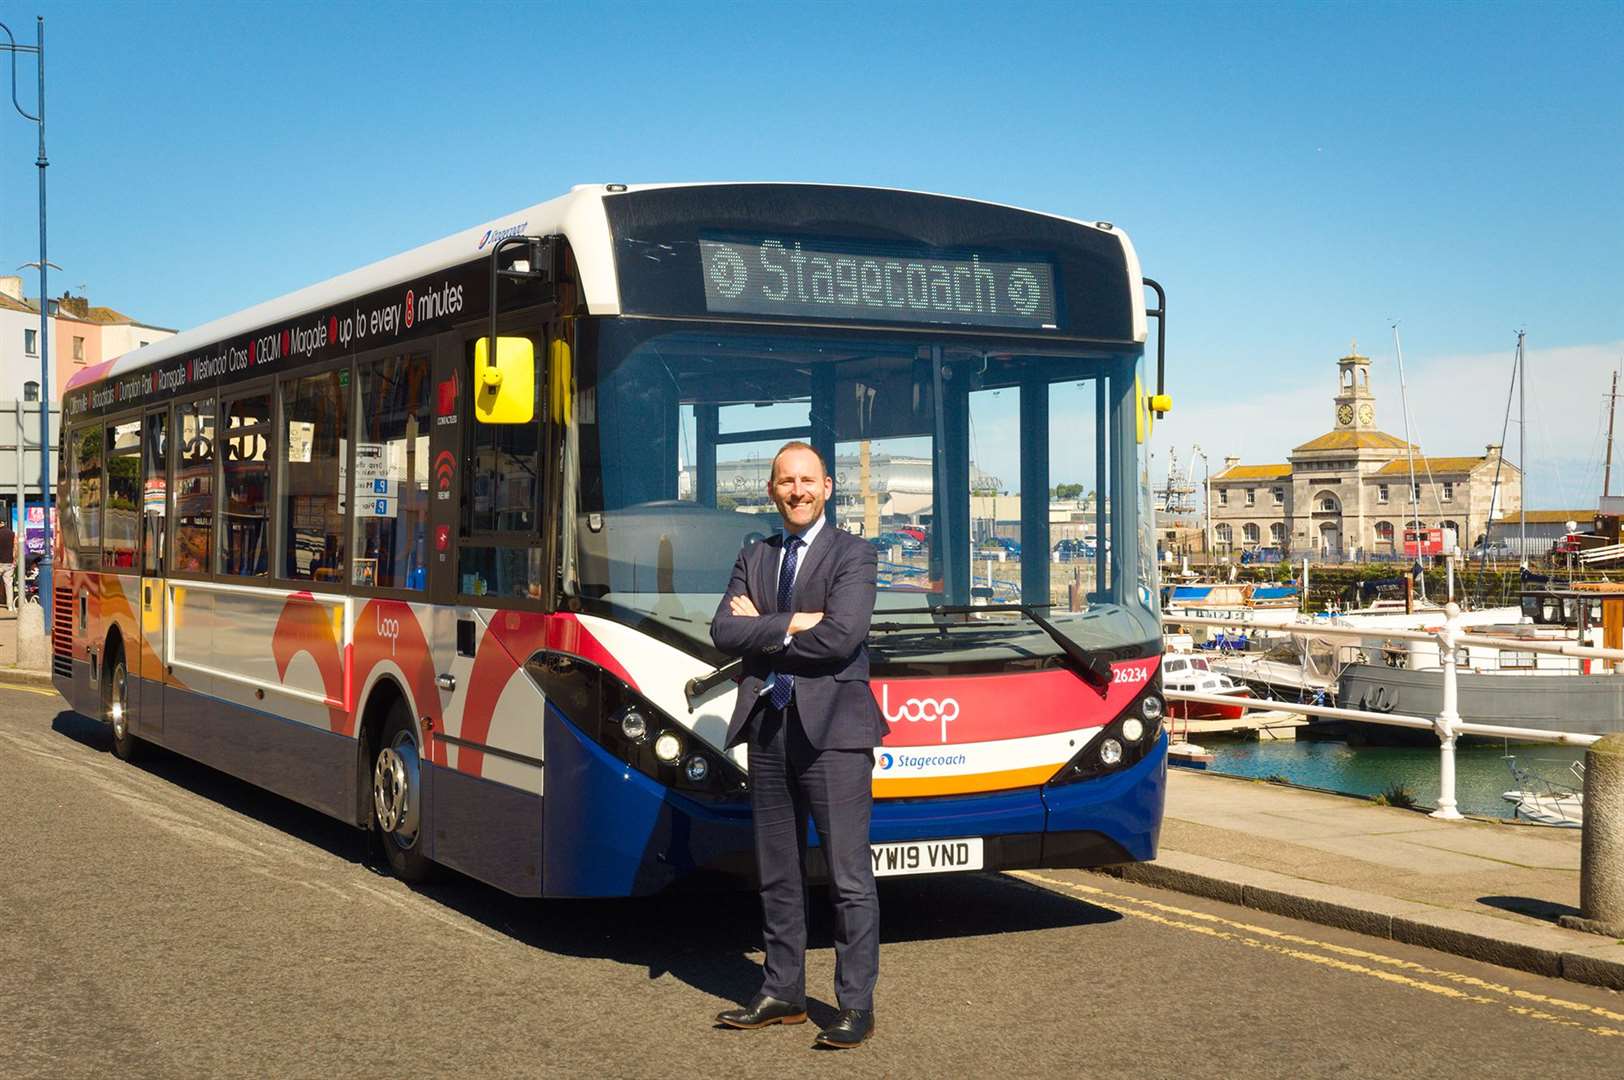 Stagecoach is rolling out a fleet of new biodiesel buses in Thanet costing £4 million (12550609)